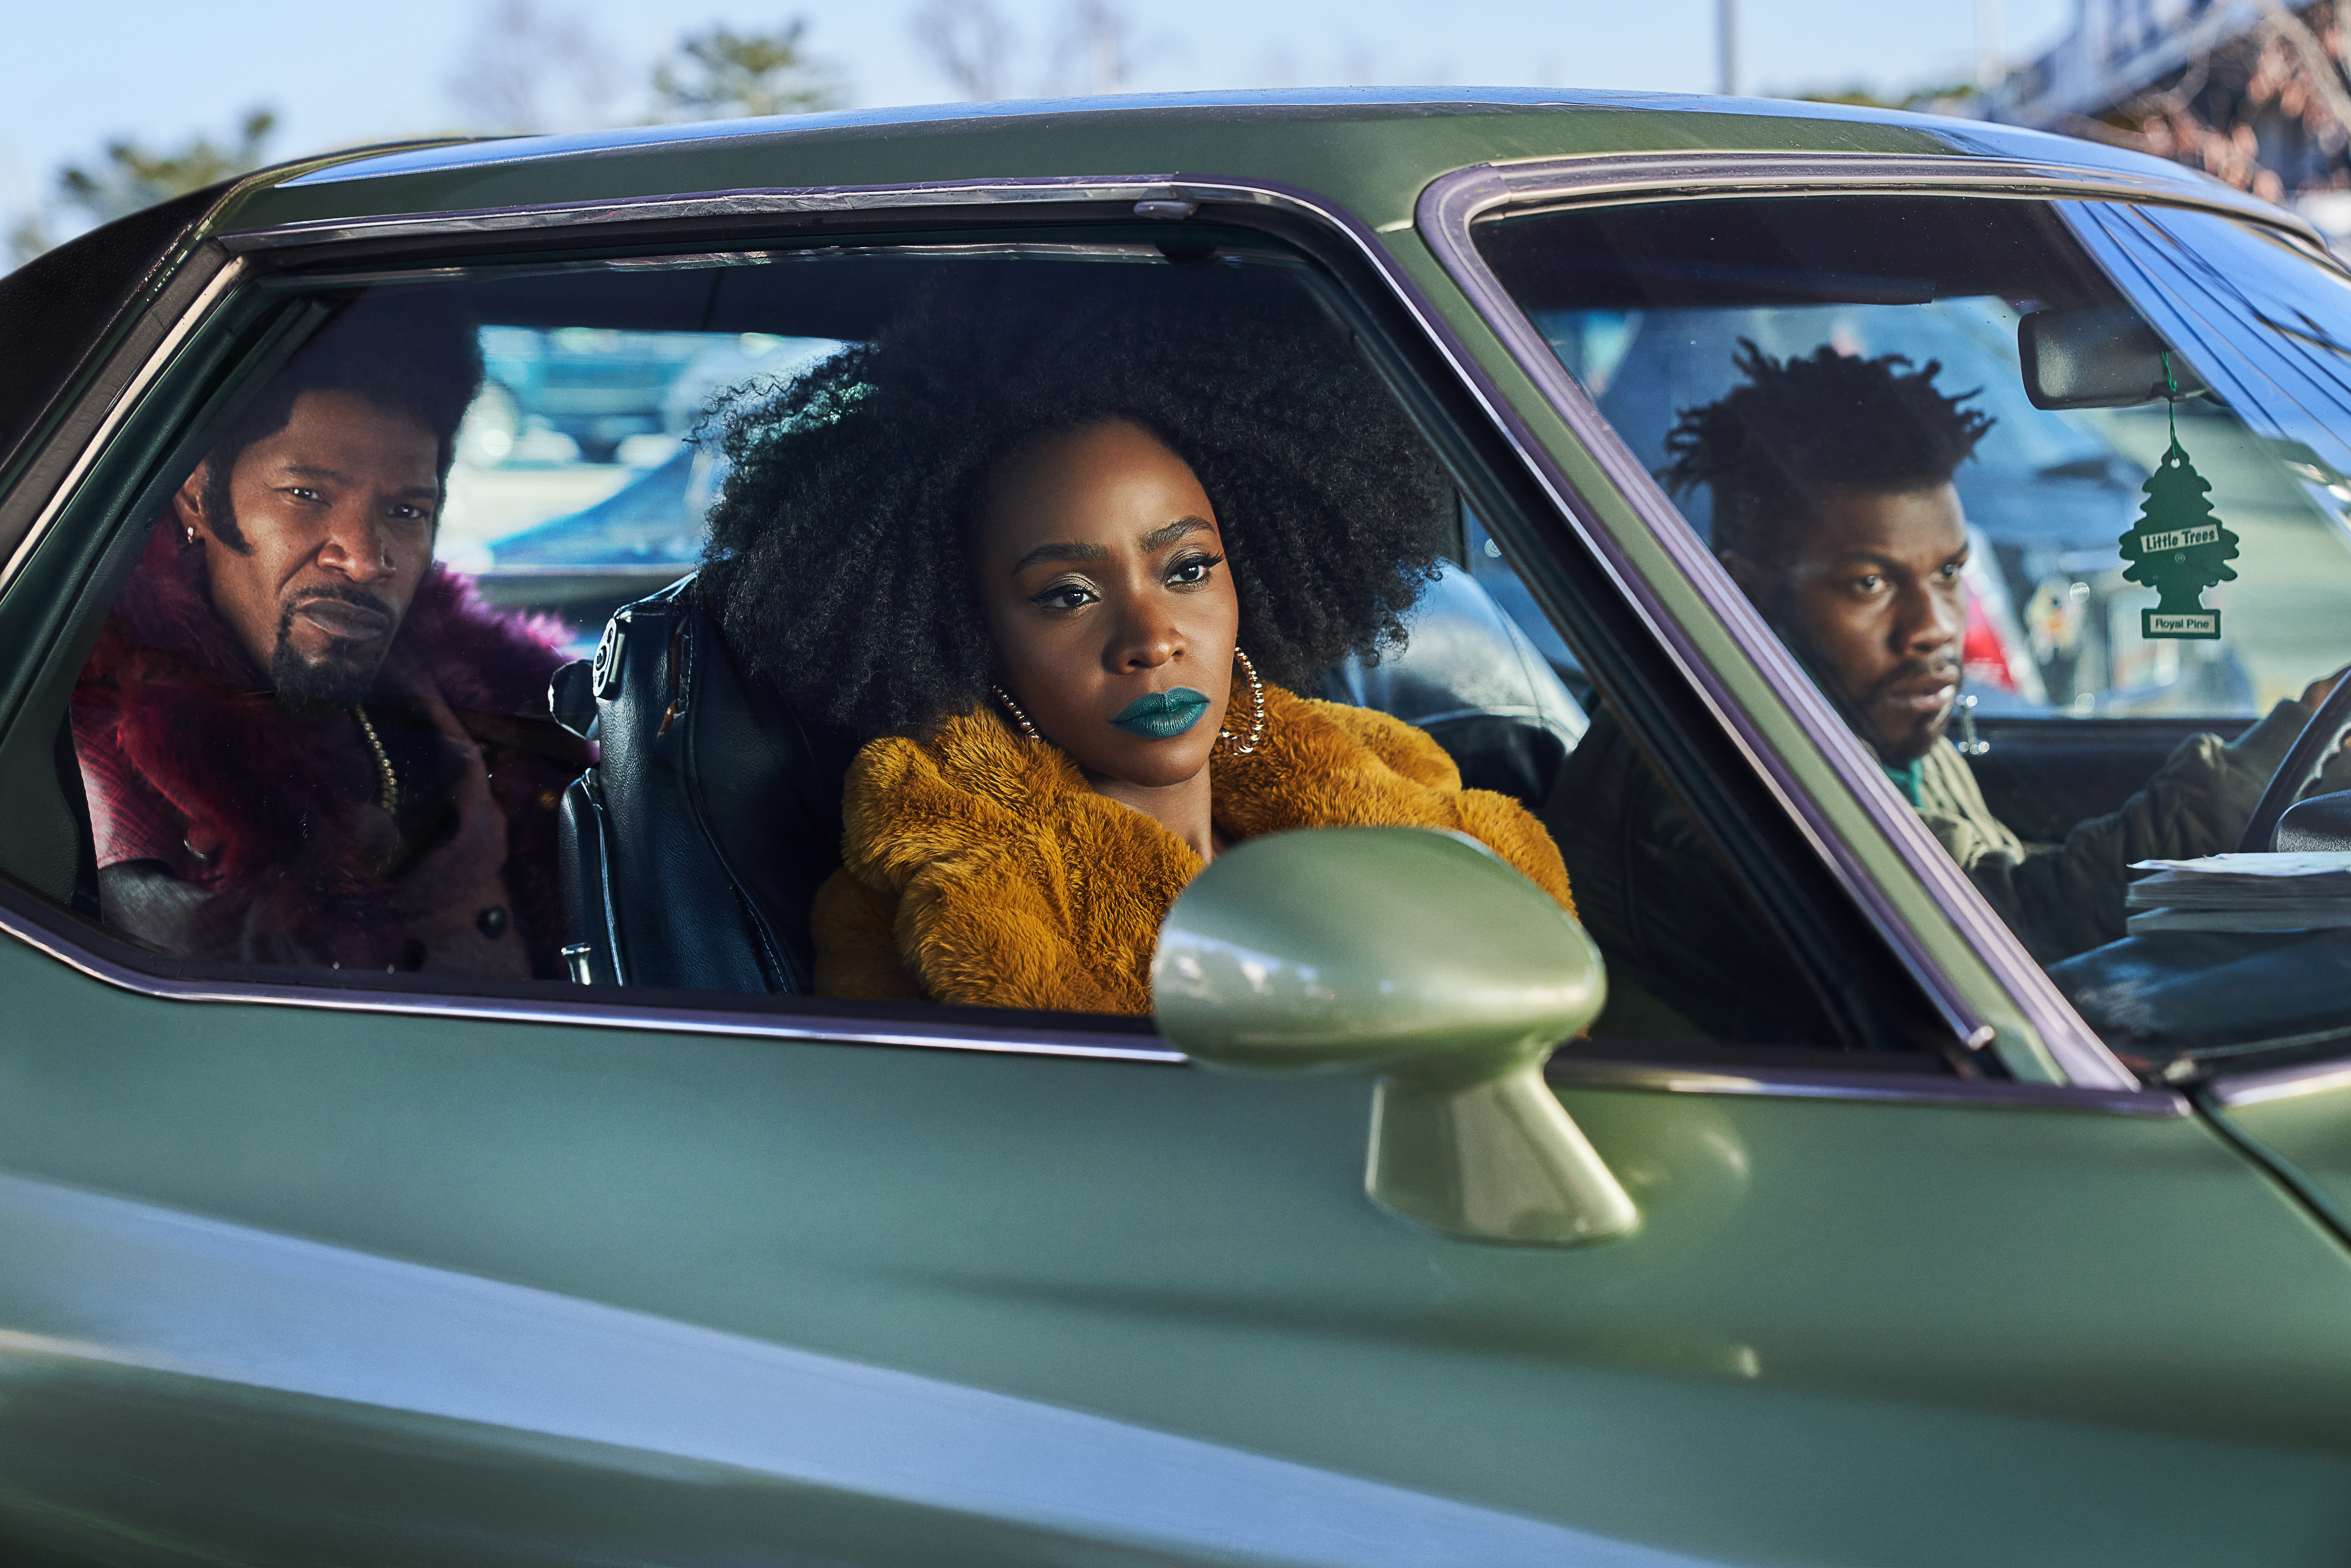 Jamie Foxx as Slick Charles, Teyonah Parris as Yo-Yo, and John Boyega as Fontaine, all sitting in a car in They Cloned Tyrone.